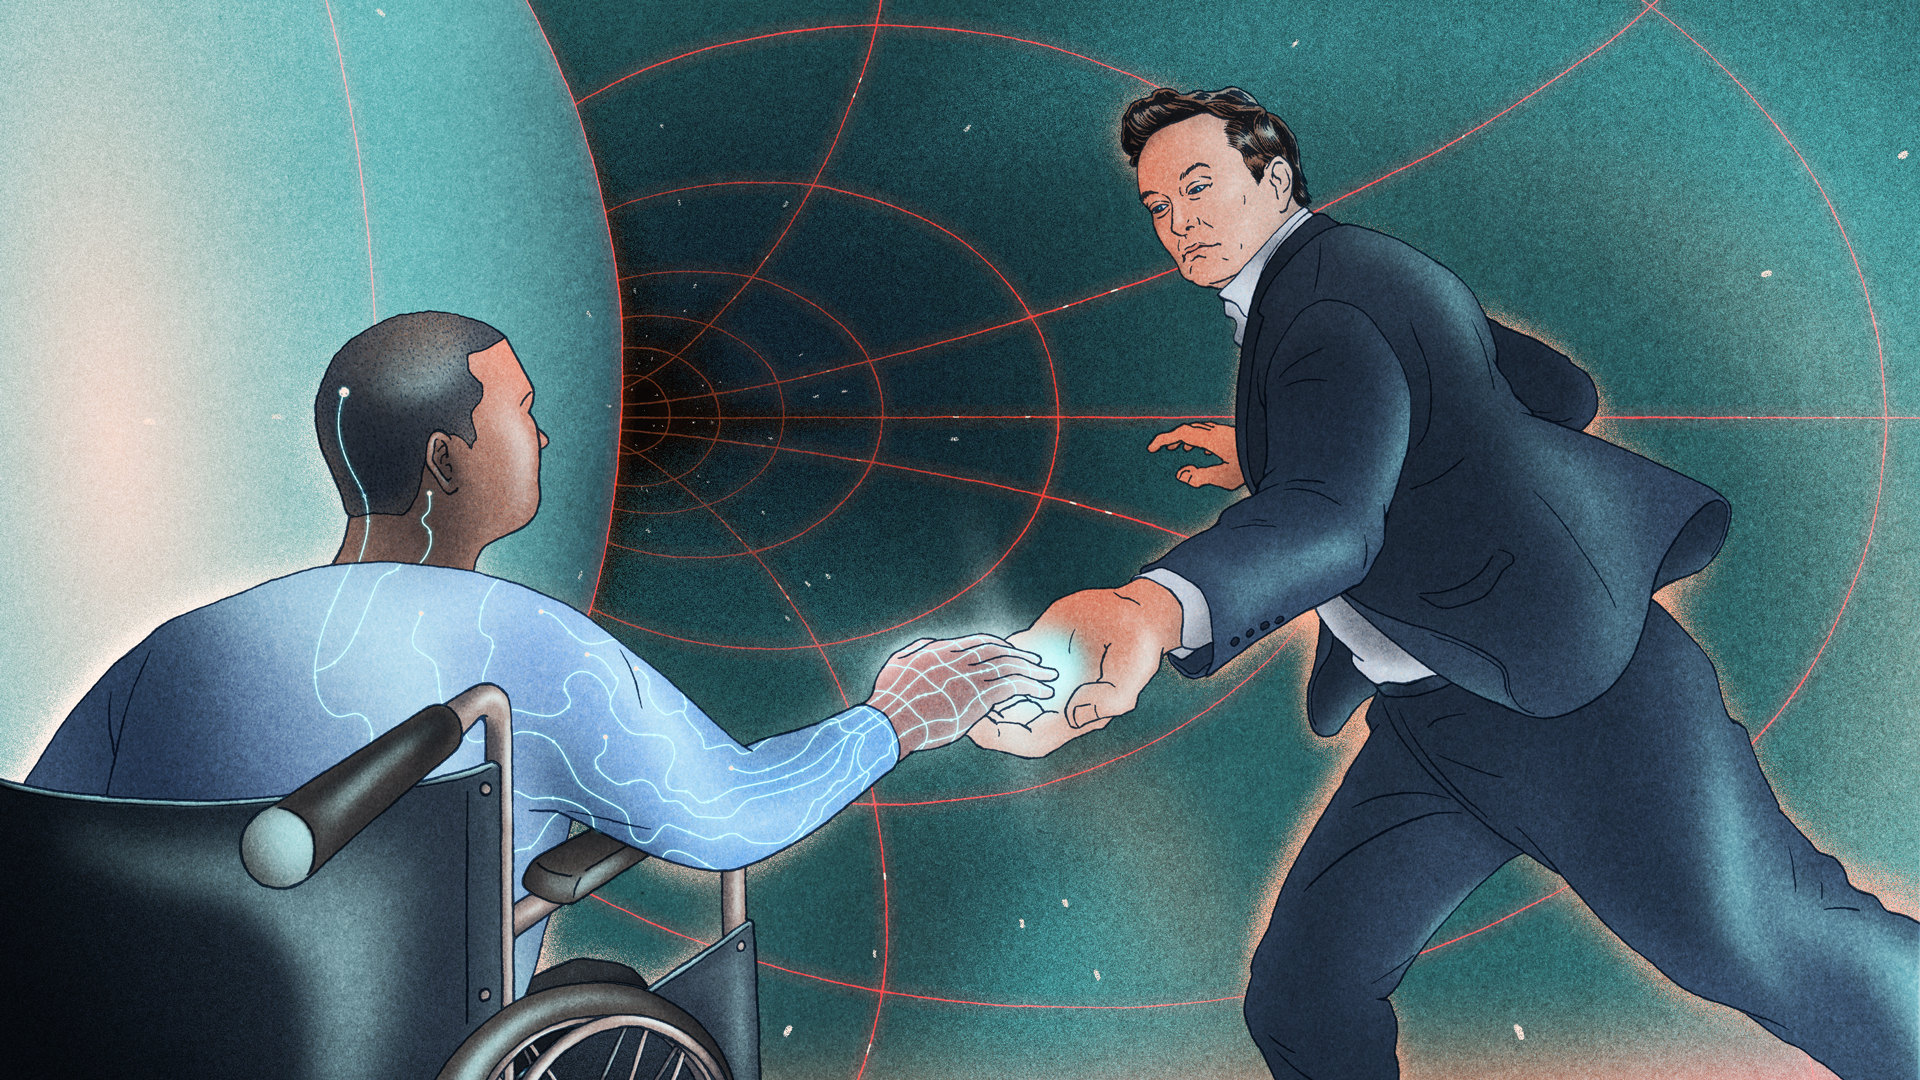 An illustration of Elon Musk attempting to guide a man using a wheelchair into a mysterious, dark tunnel. The man has glowing threads that run from his hand to his head.